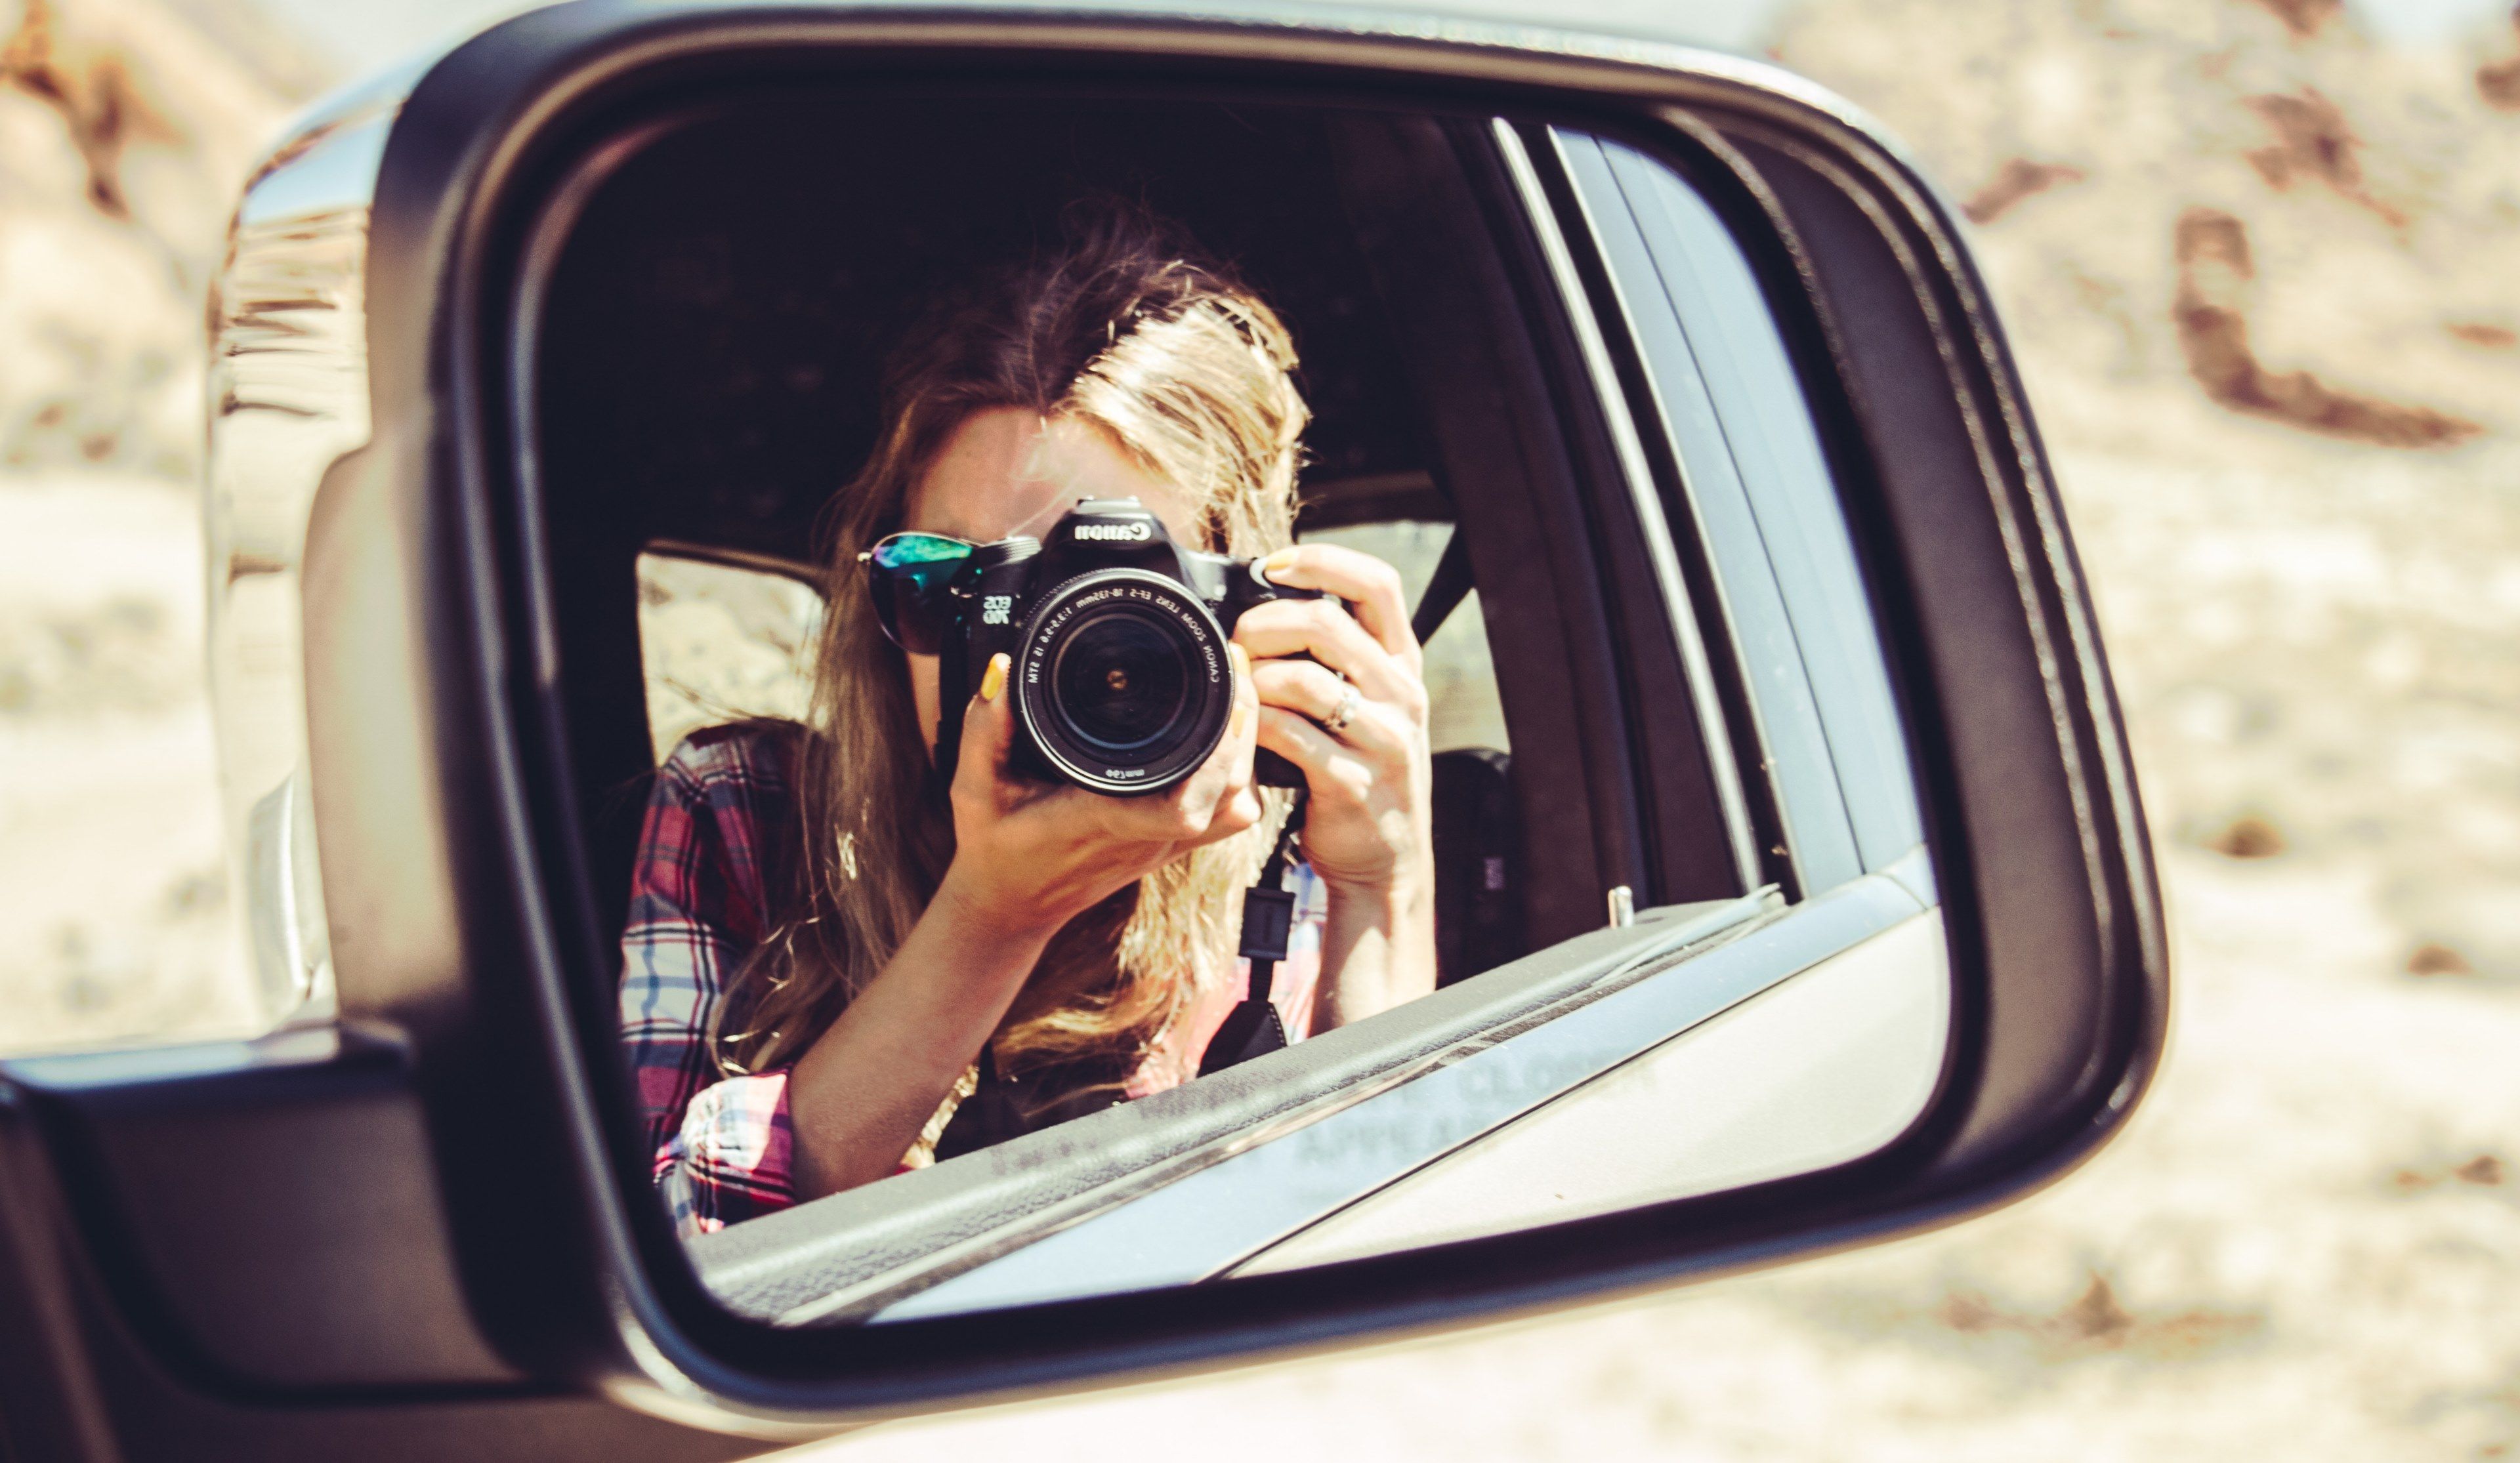 Wallpaper / a blonde woman in pink plaid taking a photo of herself by pointing a canon camera at a sideview mirror, side view mirror selfie 4k wallpaper